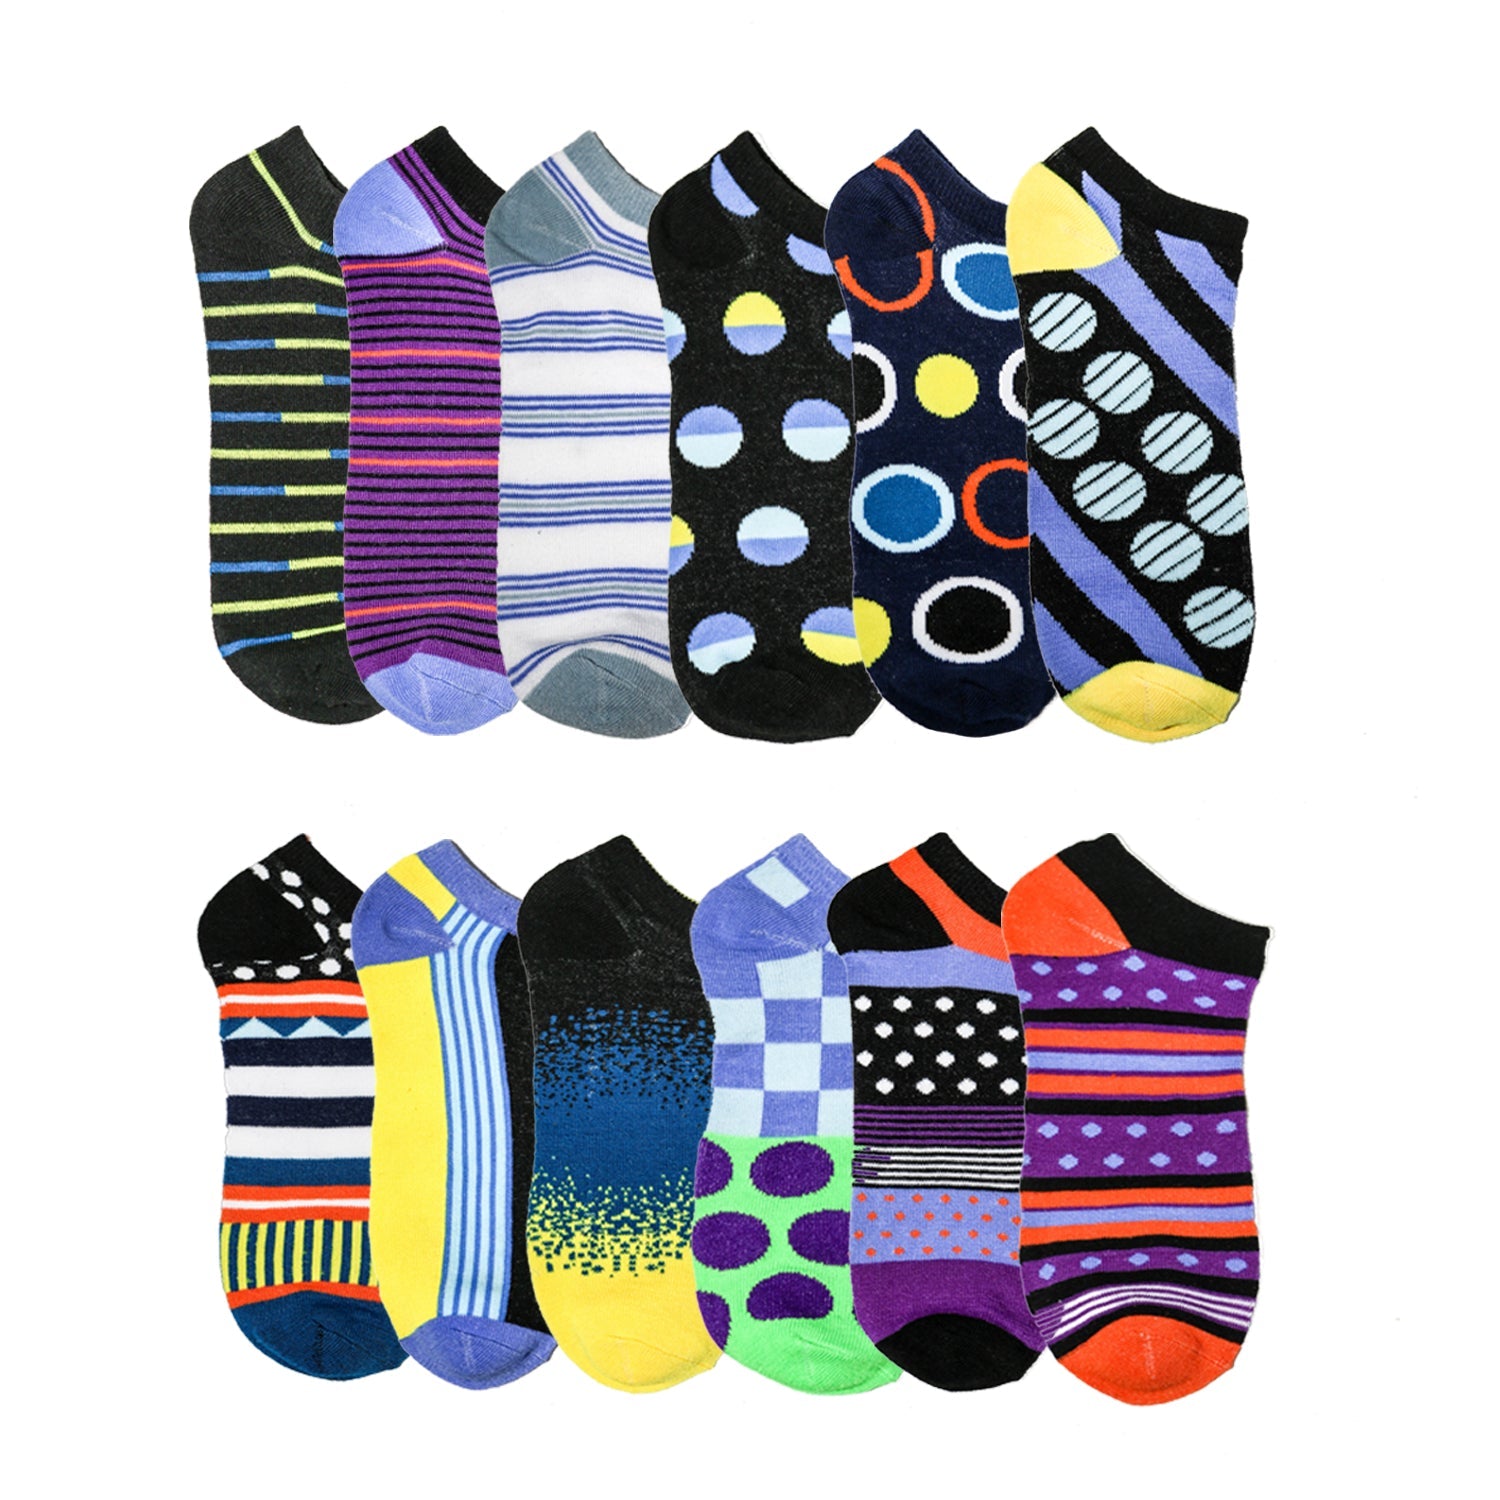 Buy Men's No Show Wholesale Sock, Size 10-13 in Assorted Prints - Bulk Case of 96 Pairs